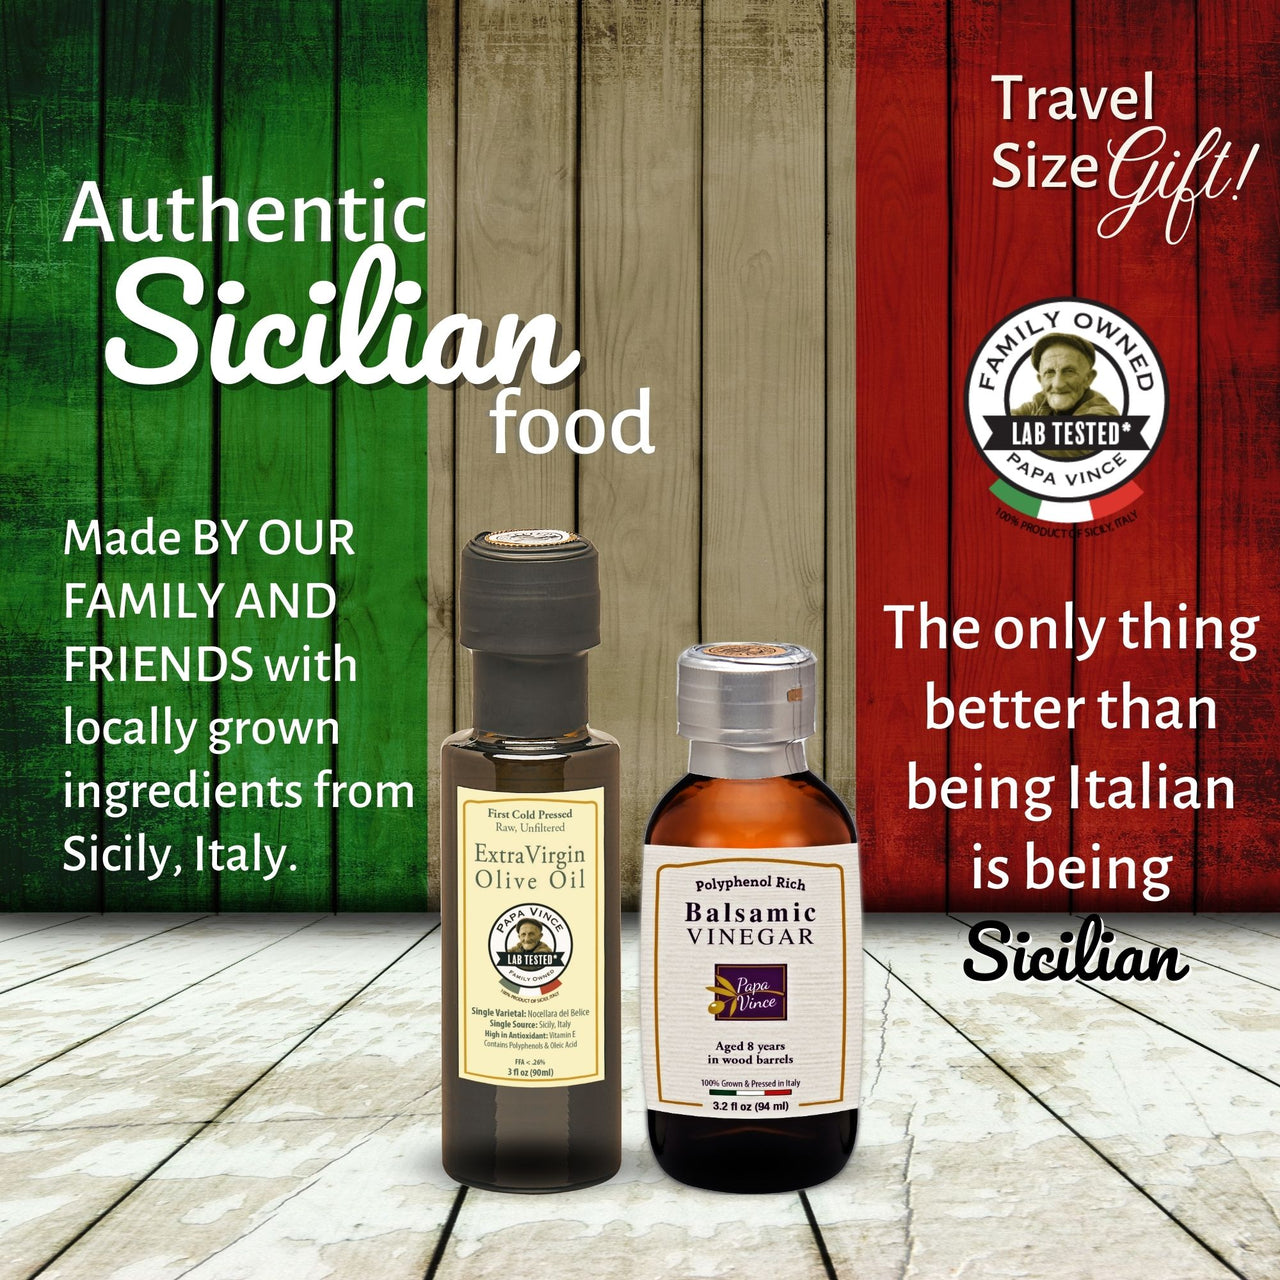 Olive Oil Set from Sicily - Extra Virgin Olive Oil & Moscato Balsamic Vinegar Gift from Italy | EVOO First Cold Pressed | Balsamic Vinegar Aged 8-years | Papa Vince | 3 fl oz bottles